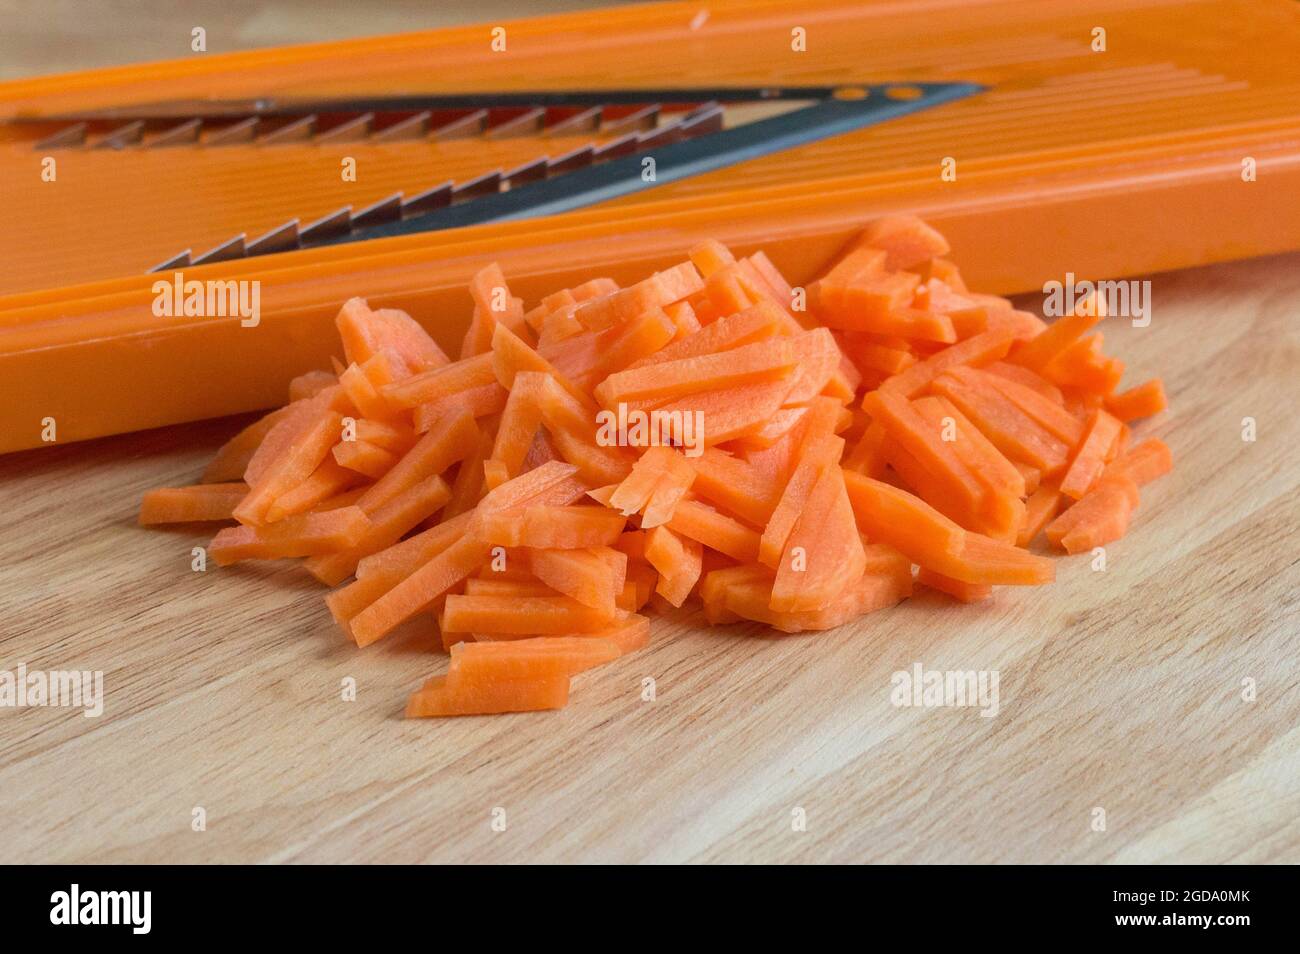 https://c8.alamy.com/comp/2GDA0MK/fresh-carrots-are-cut-into-strips-on-a-special-grater-2GDA0MK.jpg